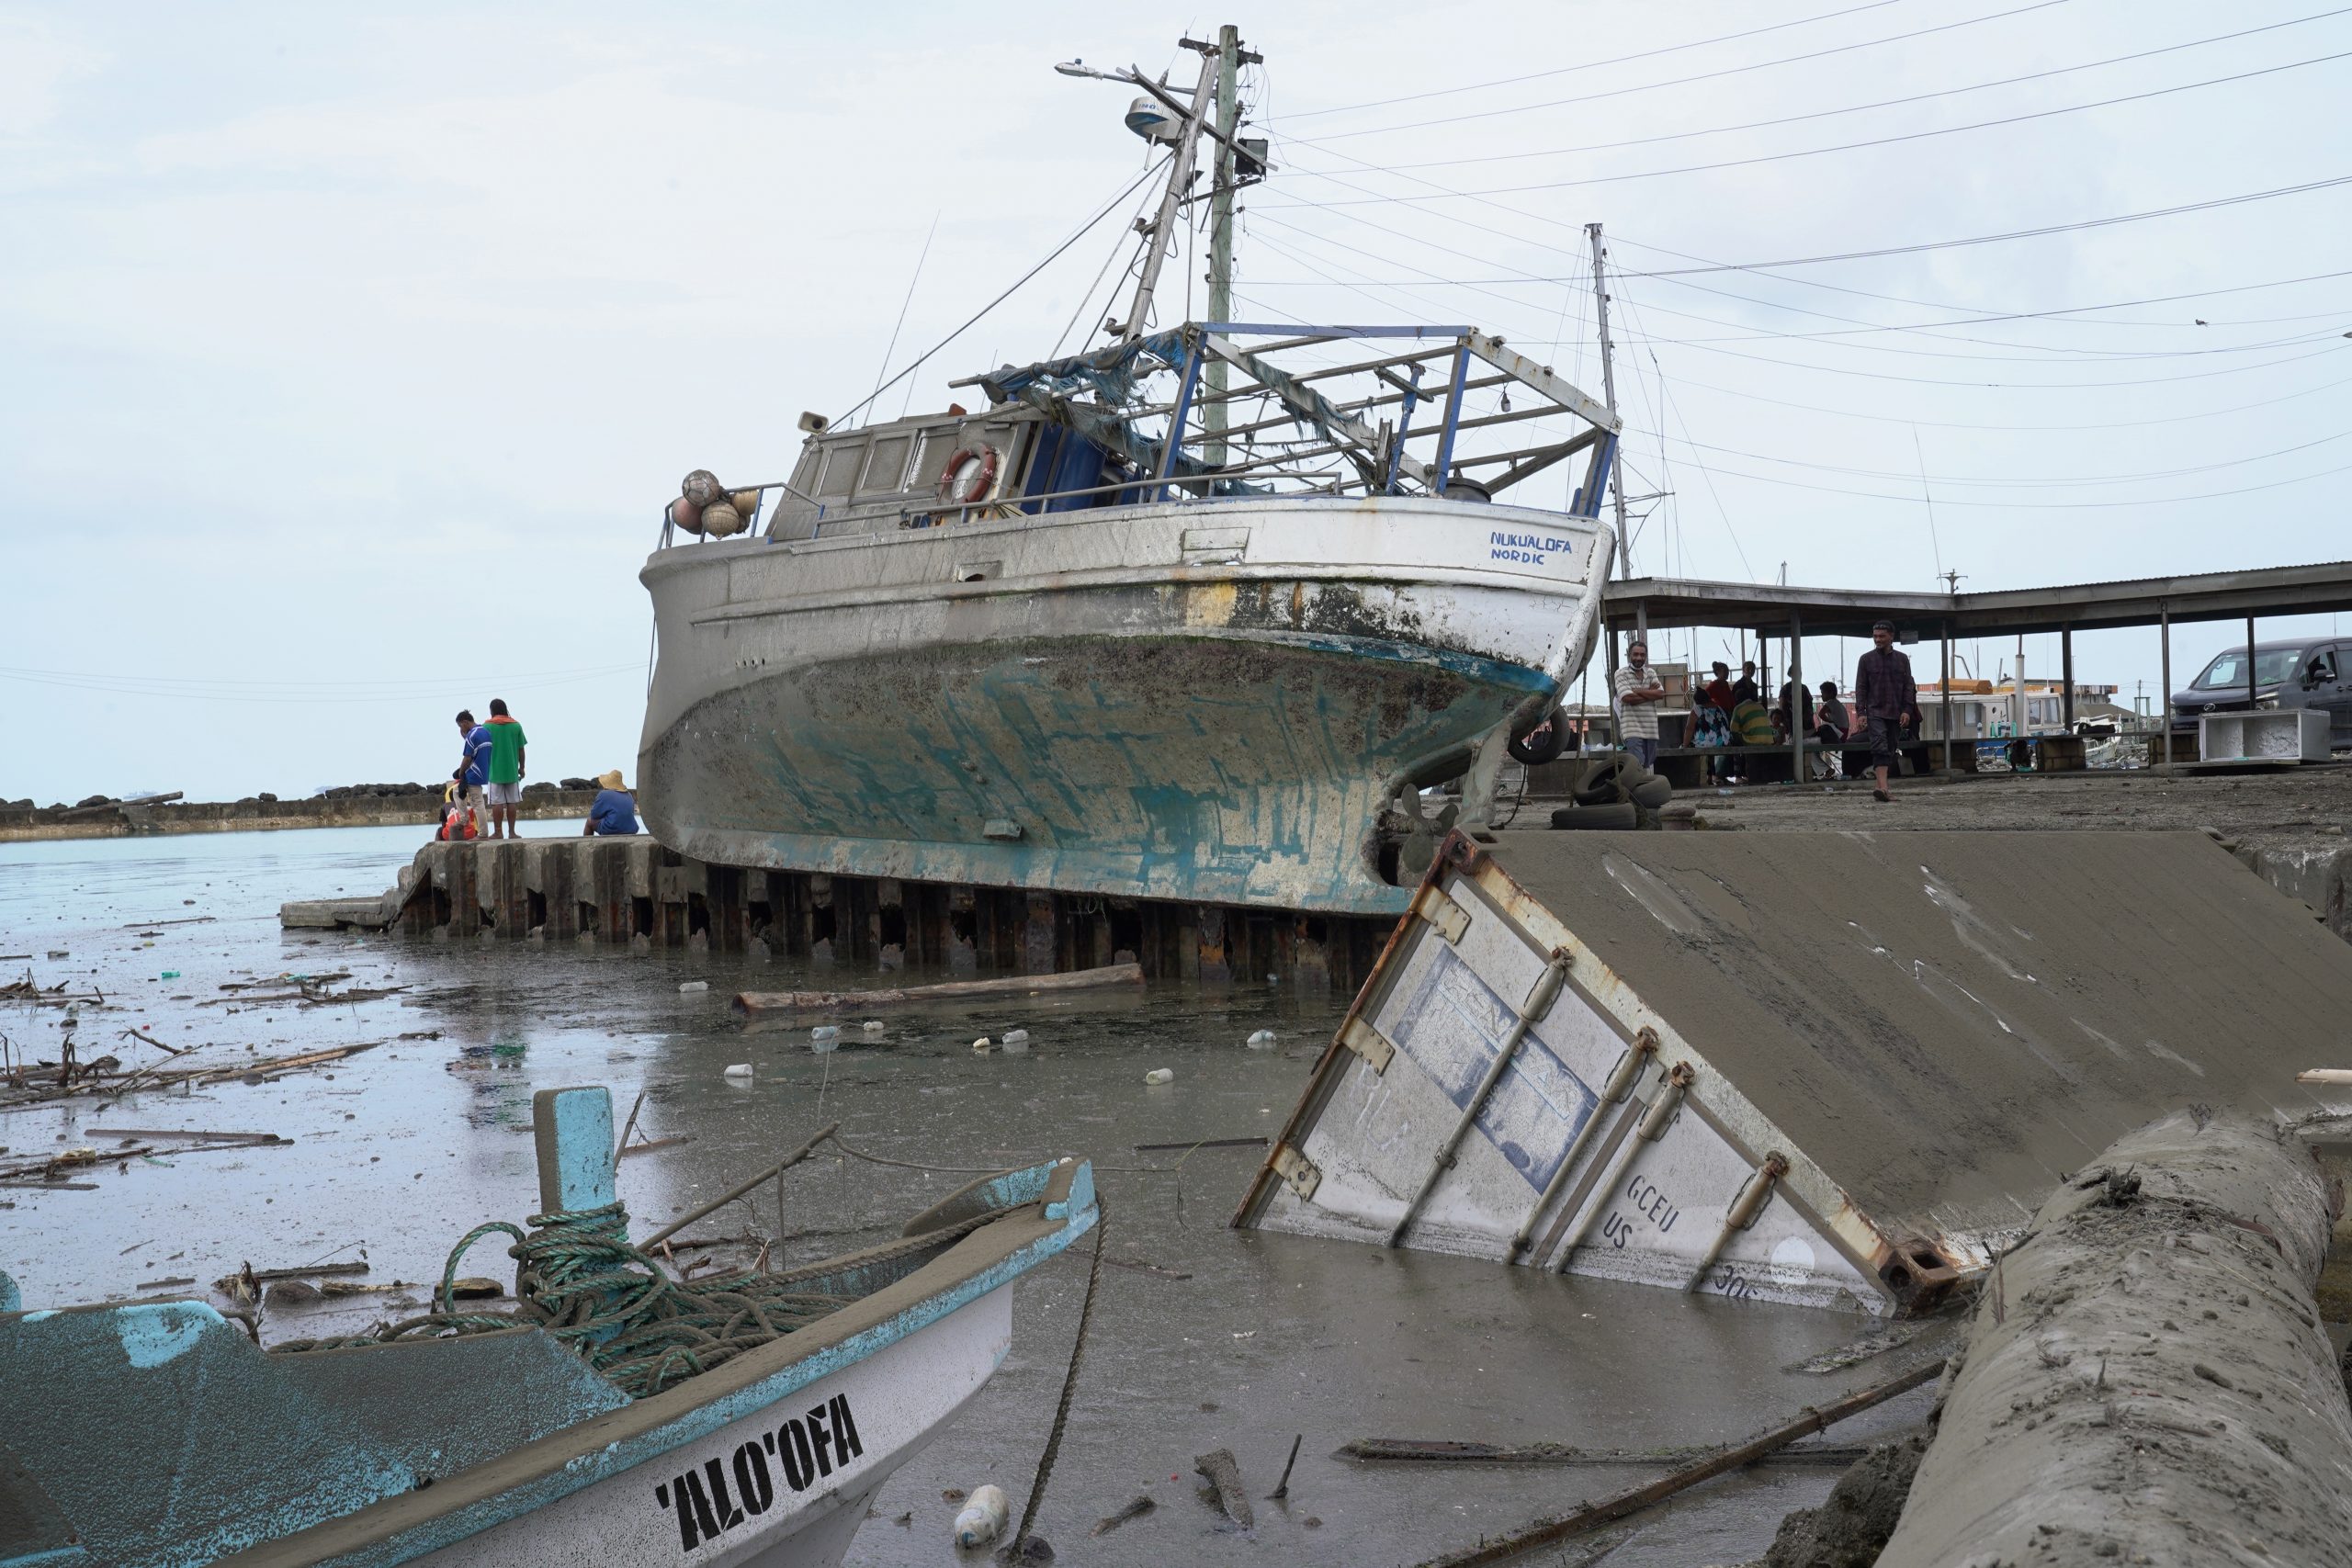 A large boat lies out of the water and near a pier after a tsunami hit.